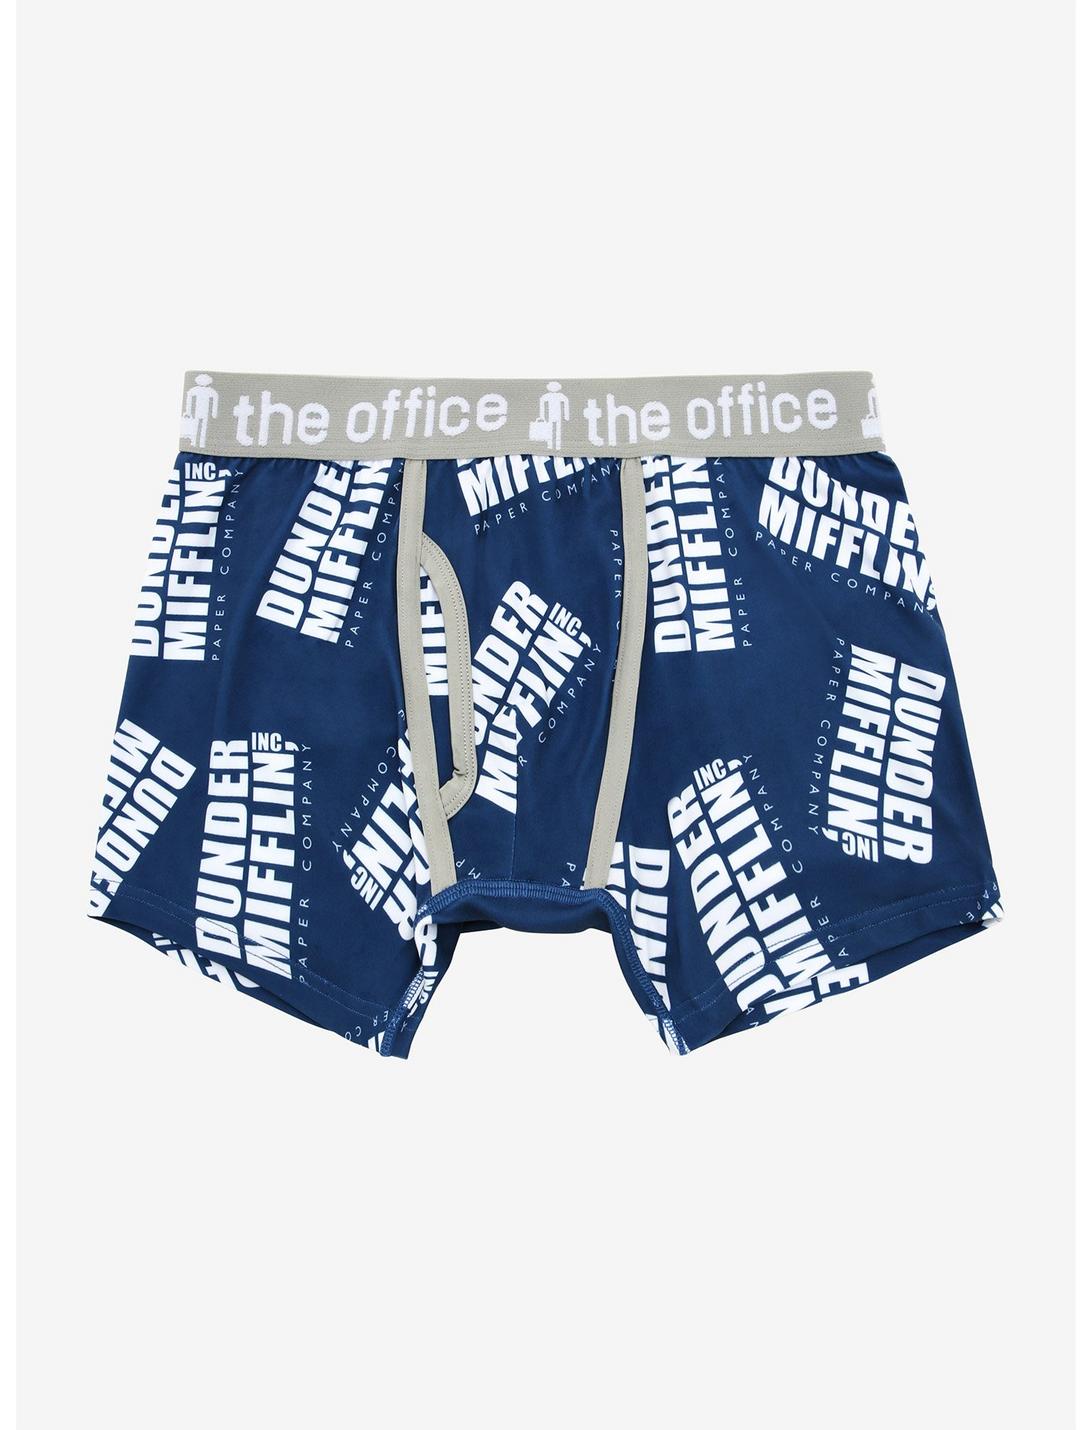 The Office Dunder Mifflin Boxer Briefs - BoxLunch Exclusive, BLUE, hi-res